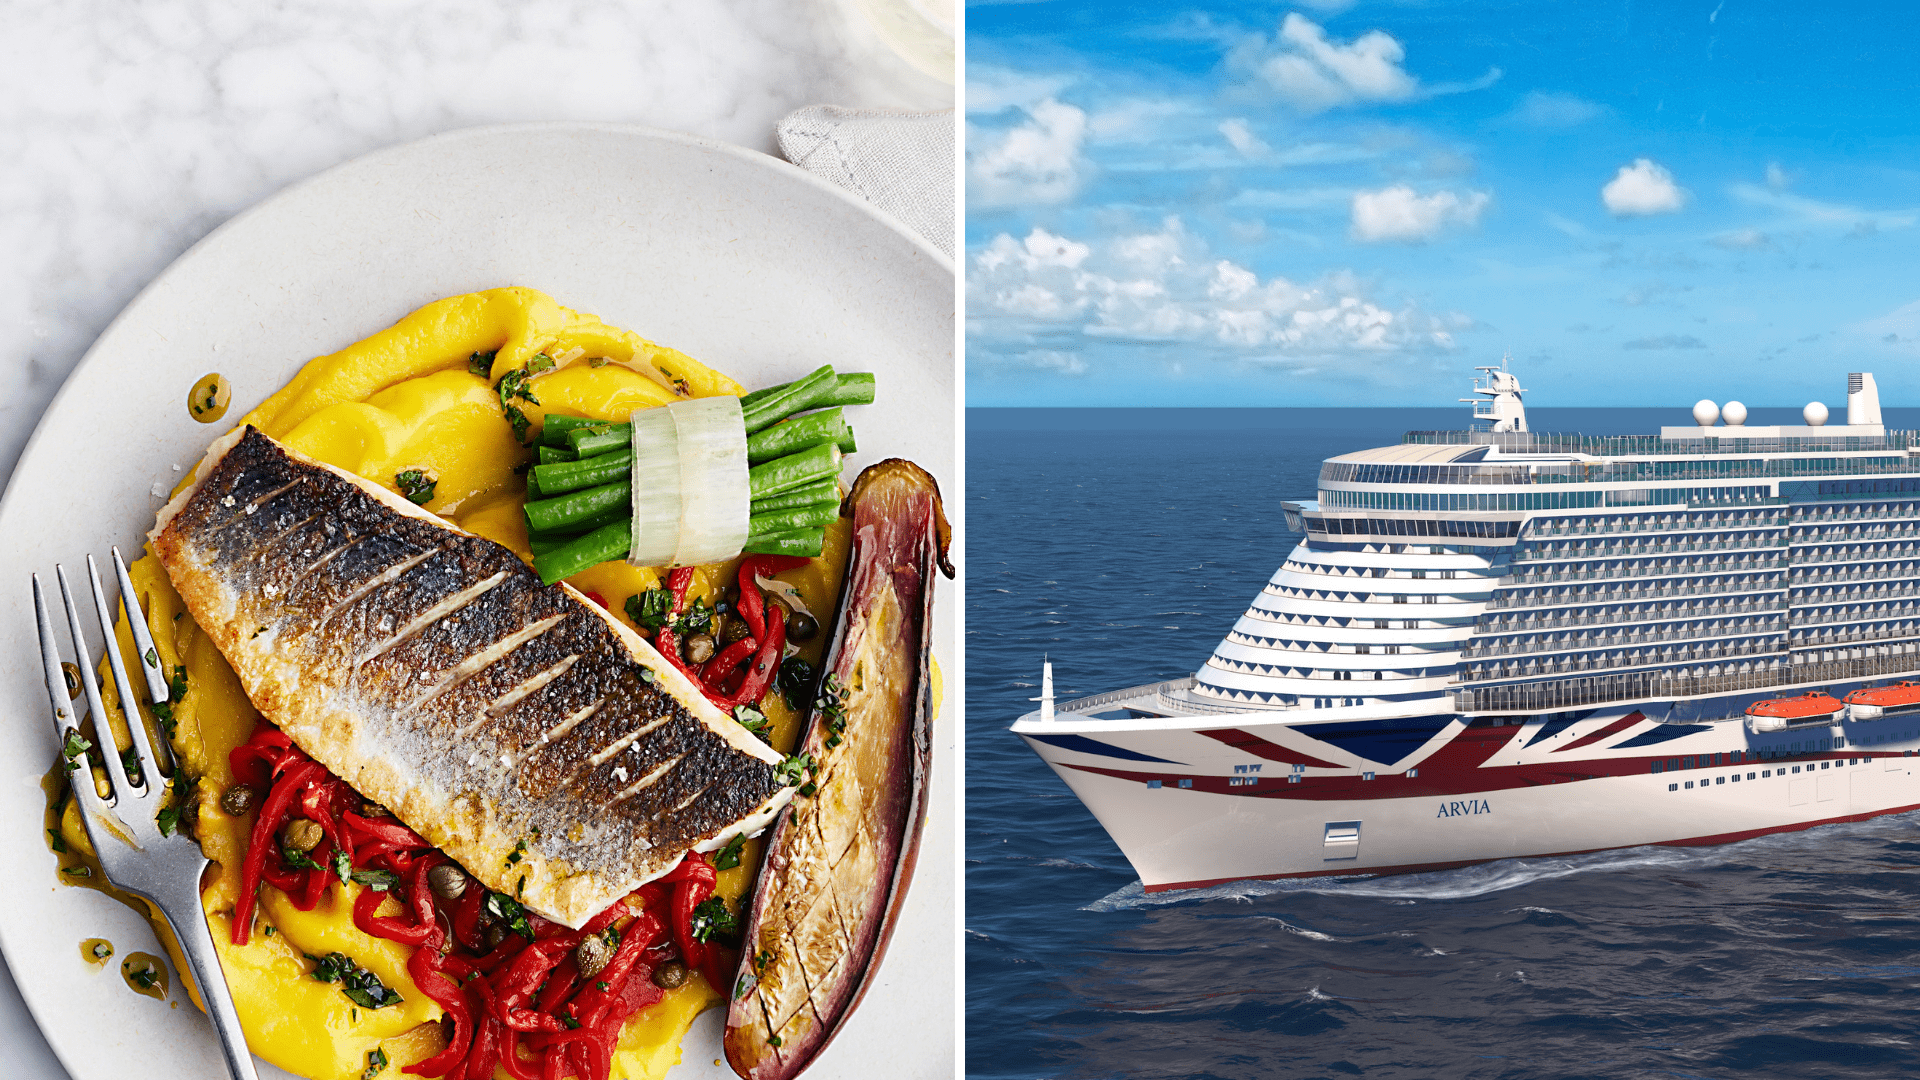 Restaurants P&O Arvia - Discover All 35 Restaurants and Bars Onboard P&O Cruises Arvia